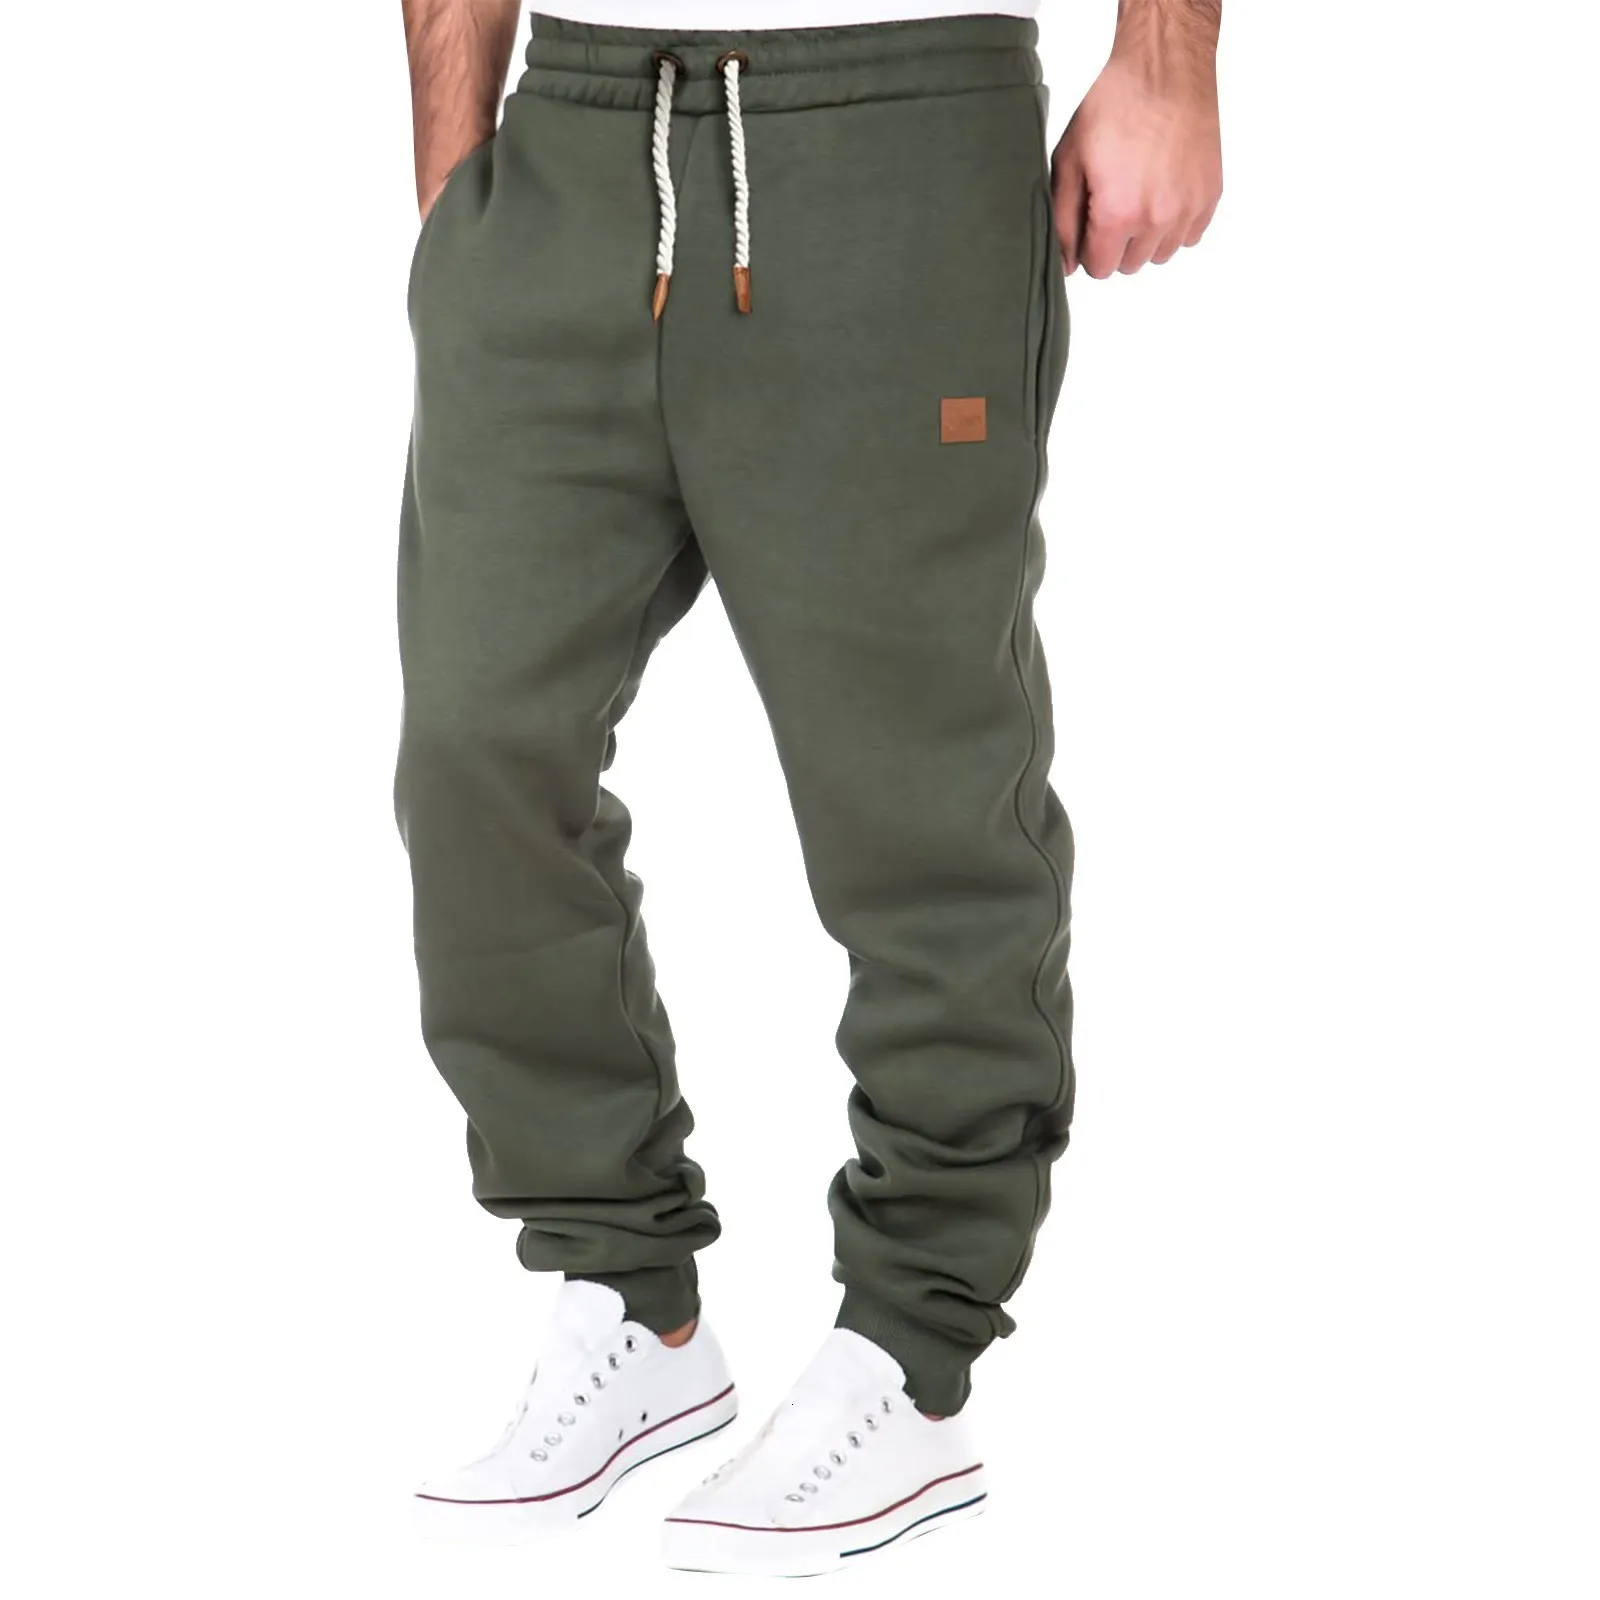 Mäns byxor Men Winter Warm Thermal Trousers Casual Athletic Fleece Pants Jogging Pants Men Sport Discovery Channel Pants Overalls 230404